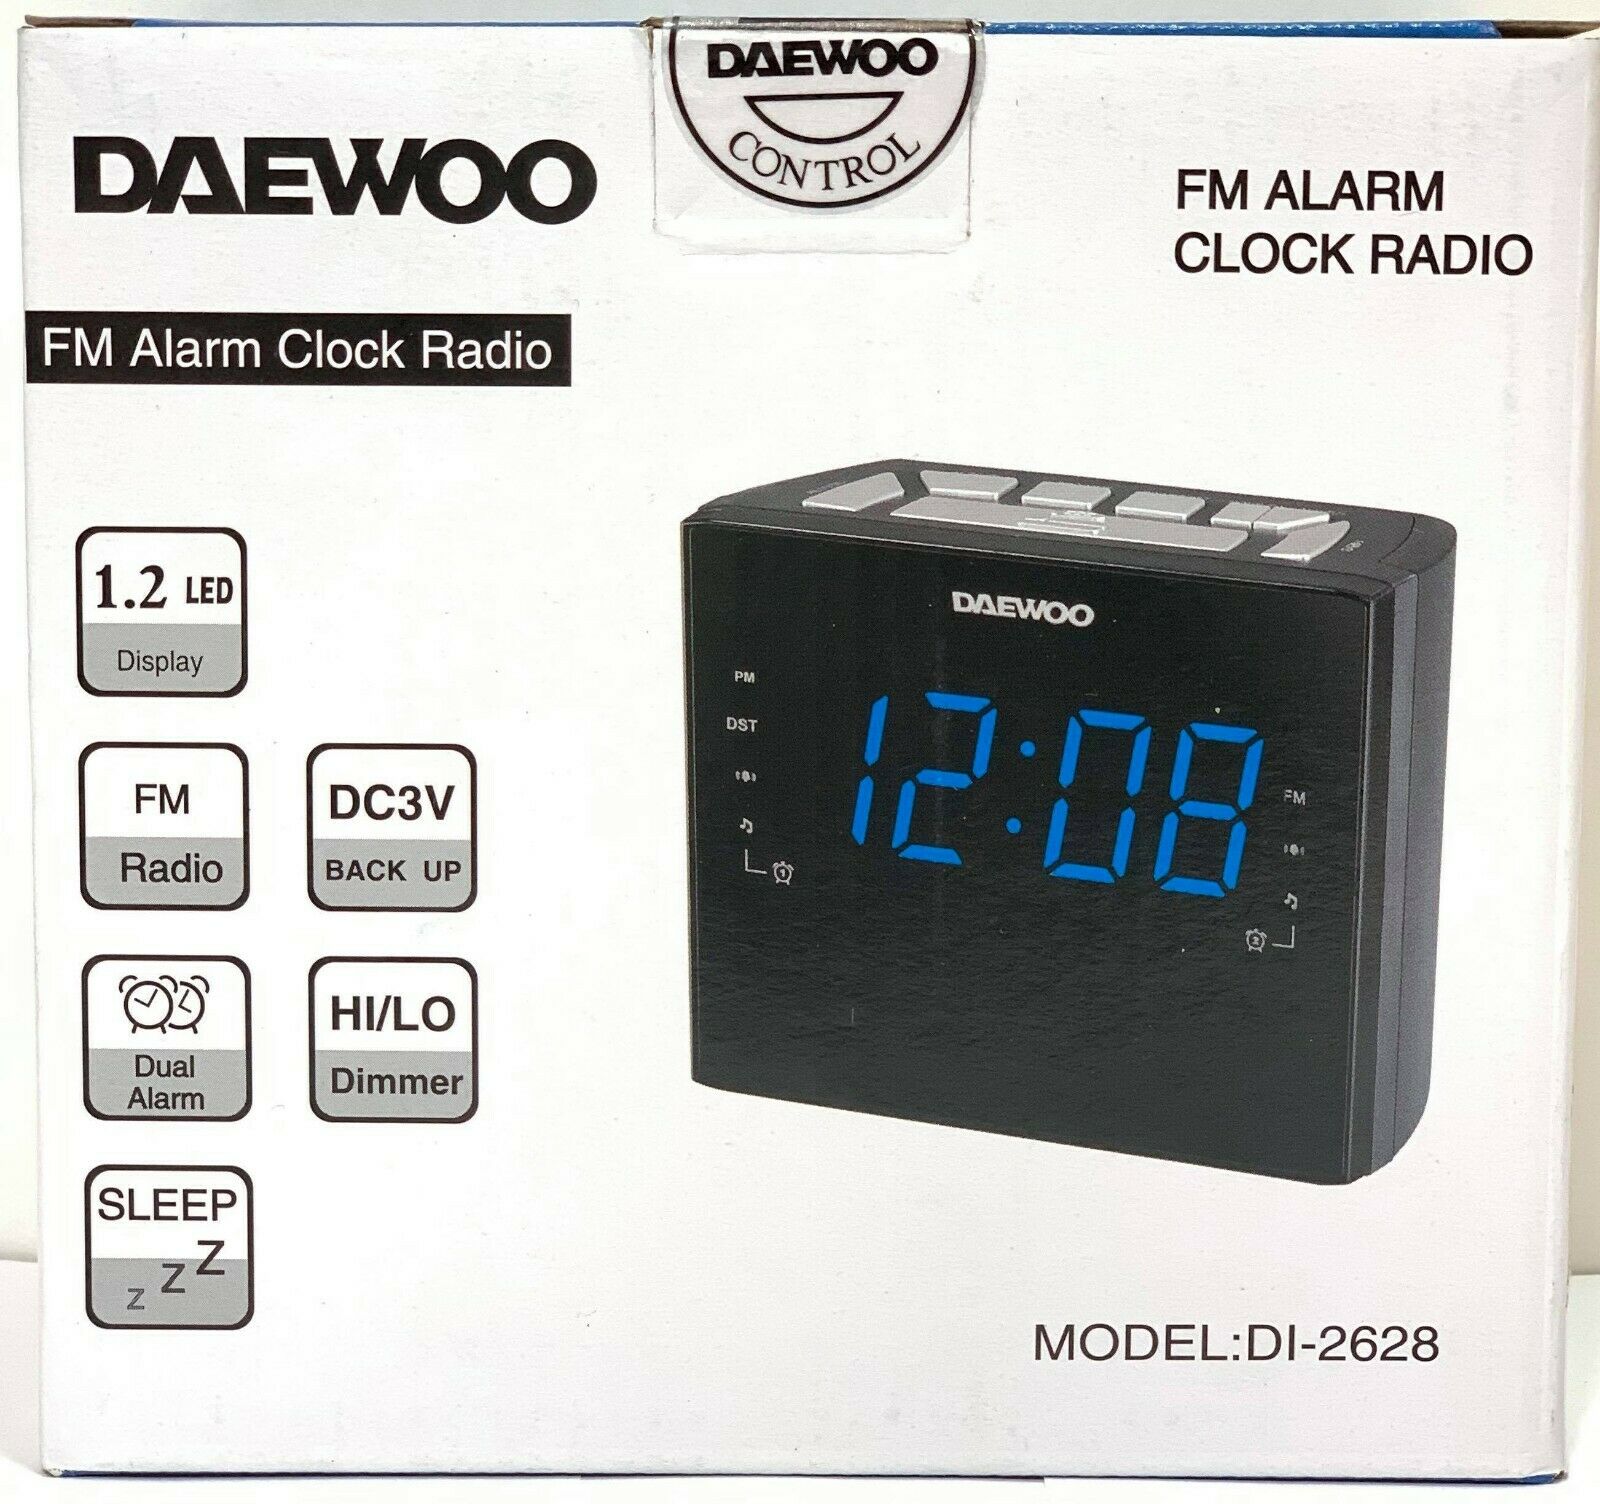 New Daewoo 220 Volt DI-2628 Alarm Clock Radio for Export 220v Overseas Use Only 